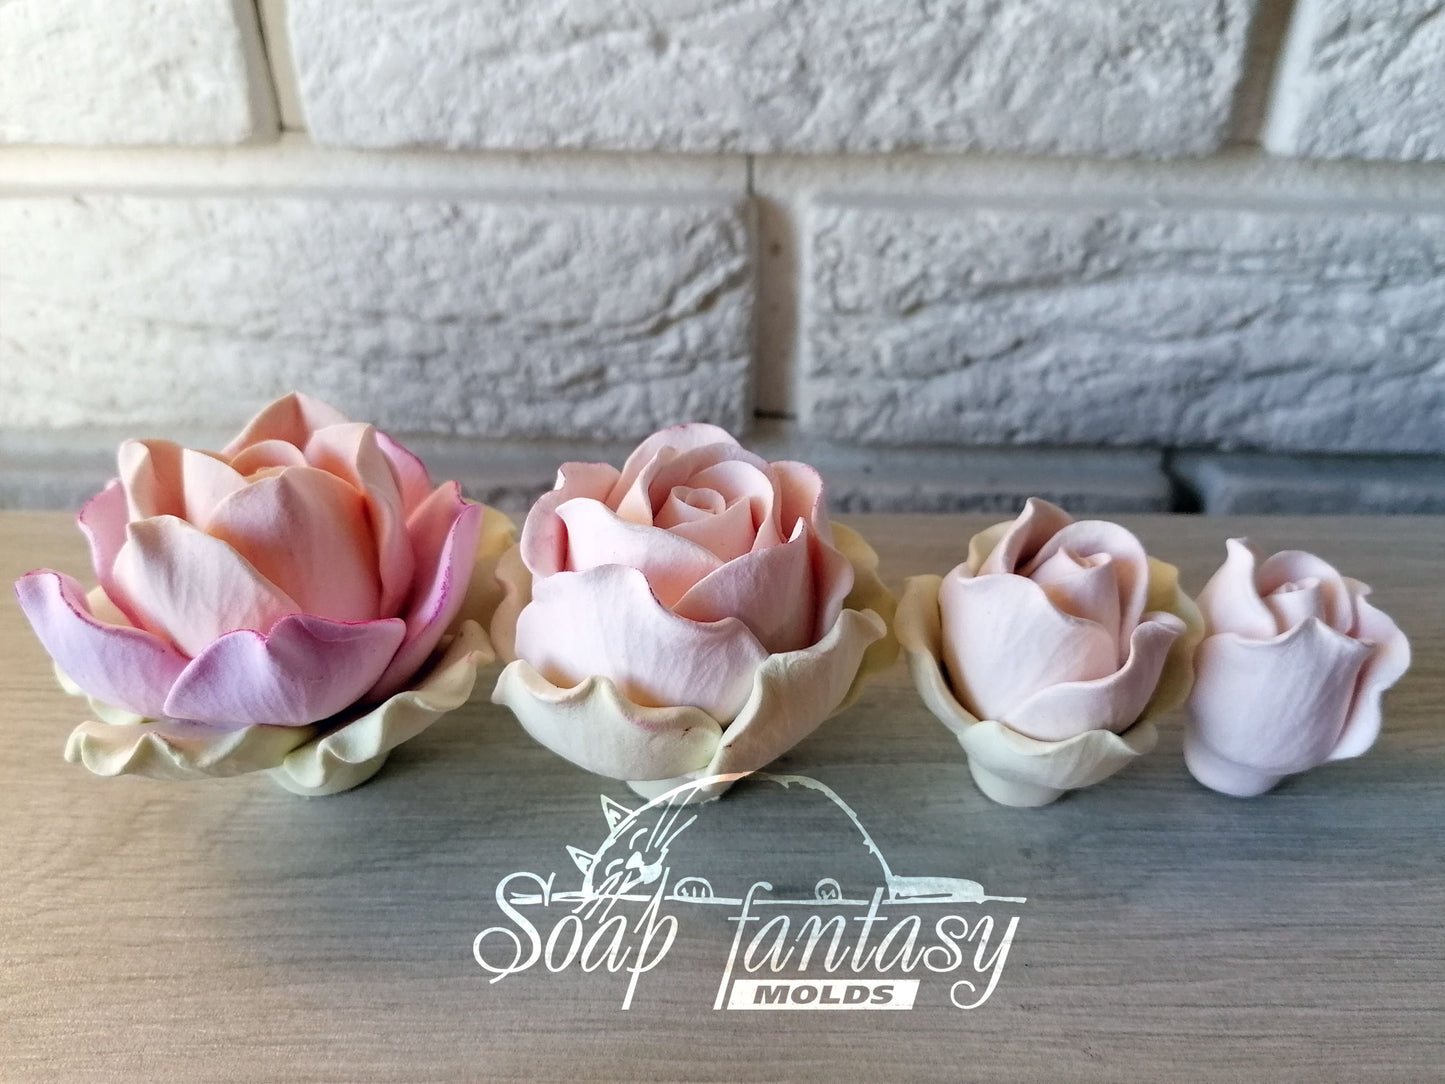 Rose bud "Estelle" silicone mold for soap making